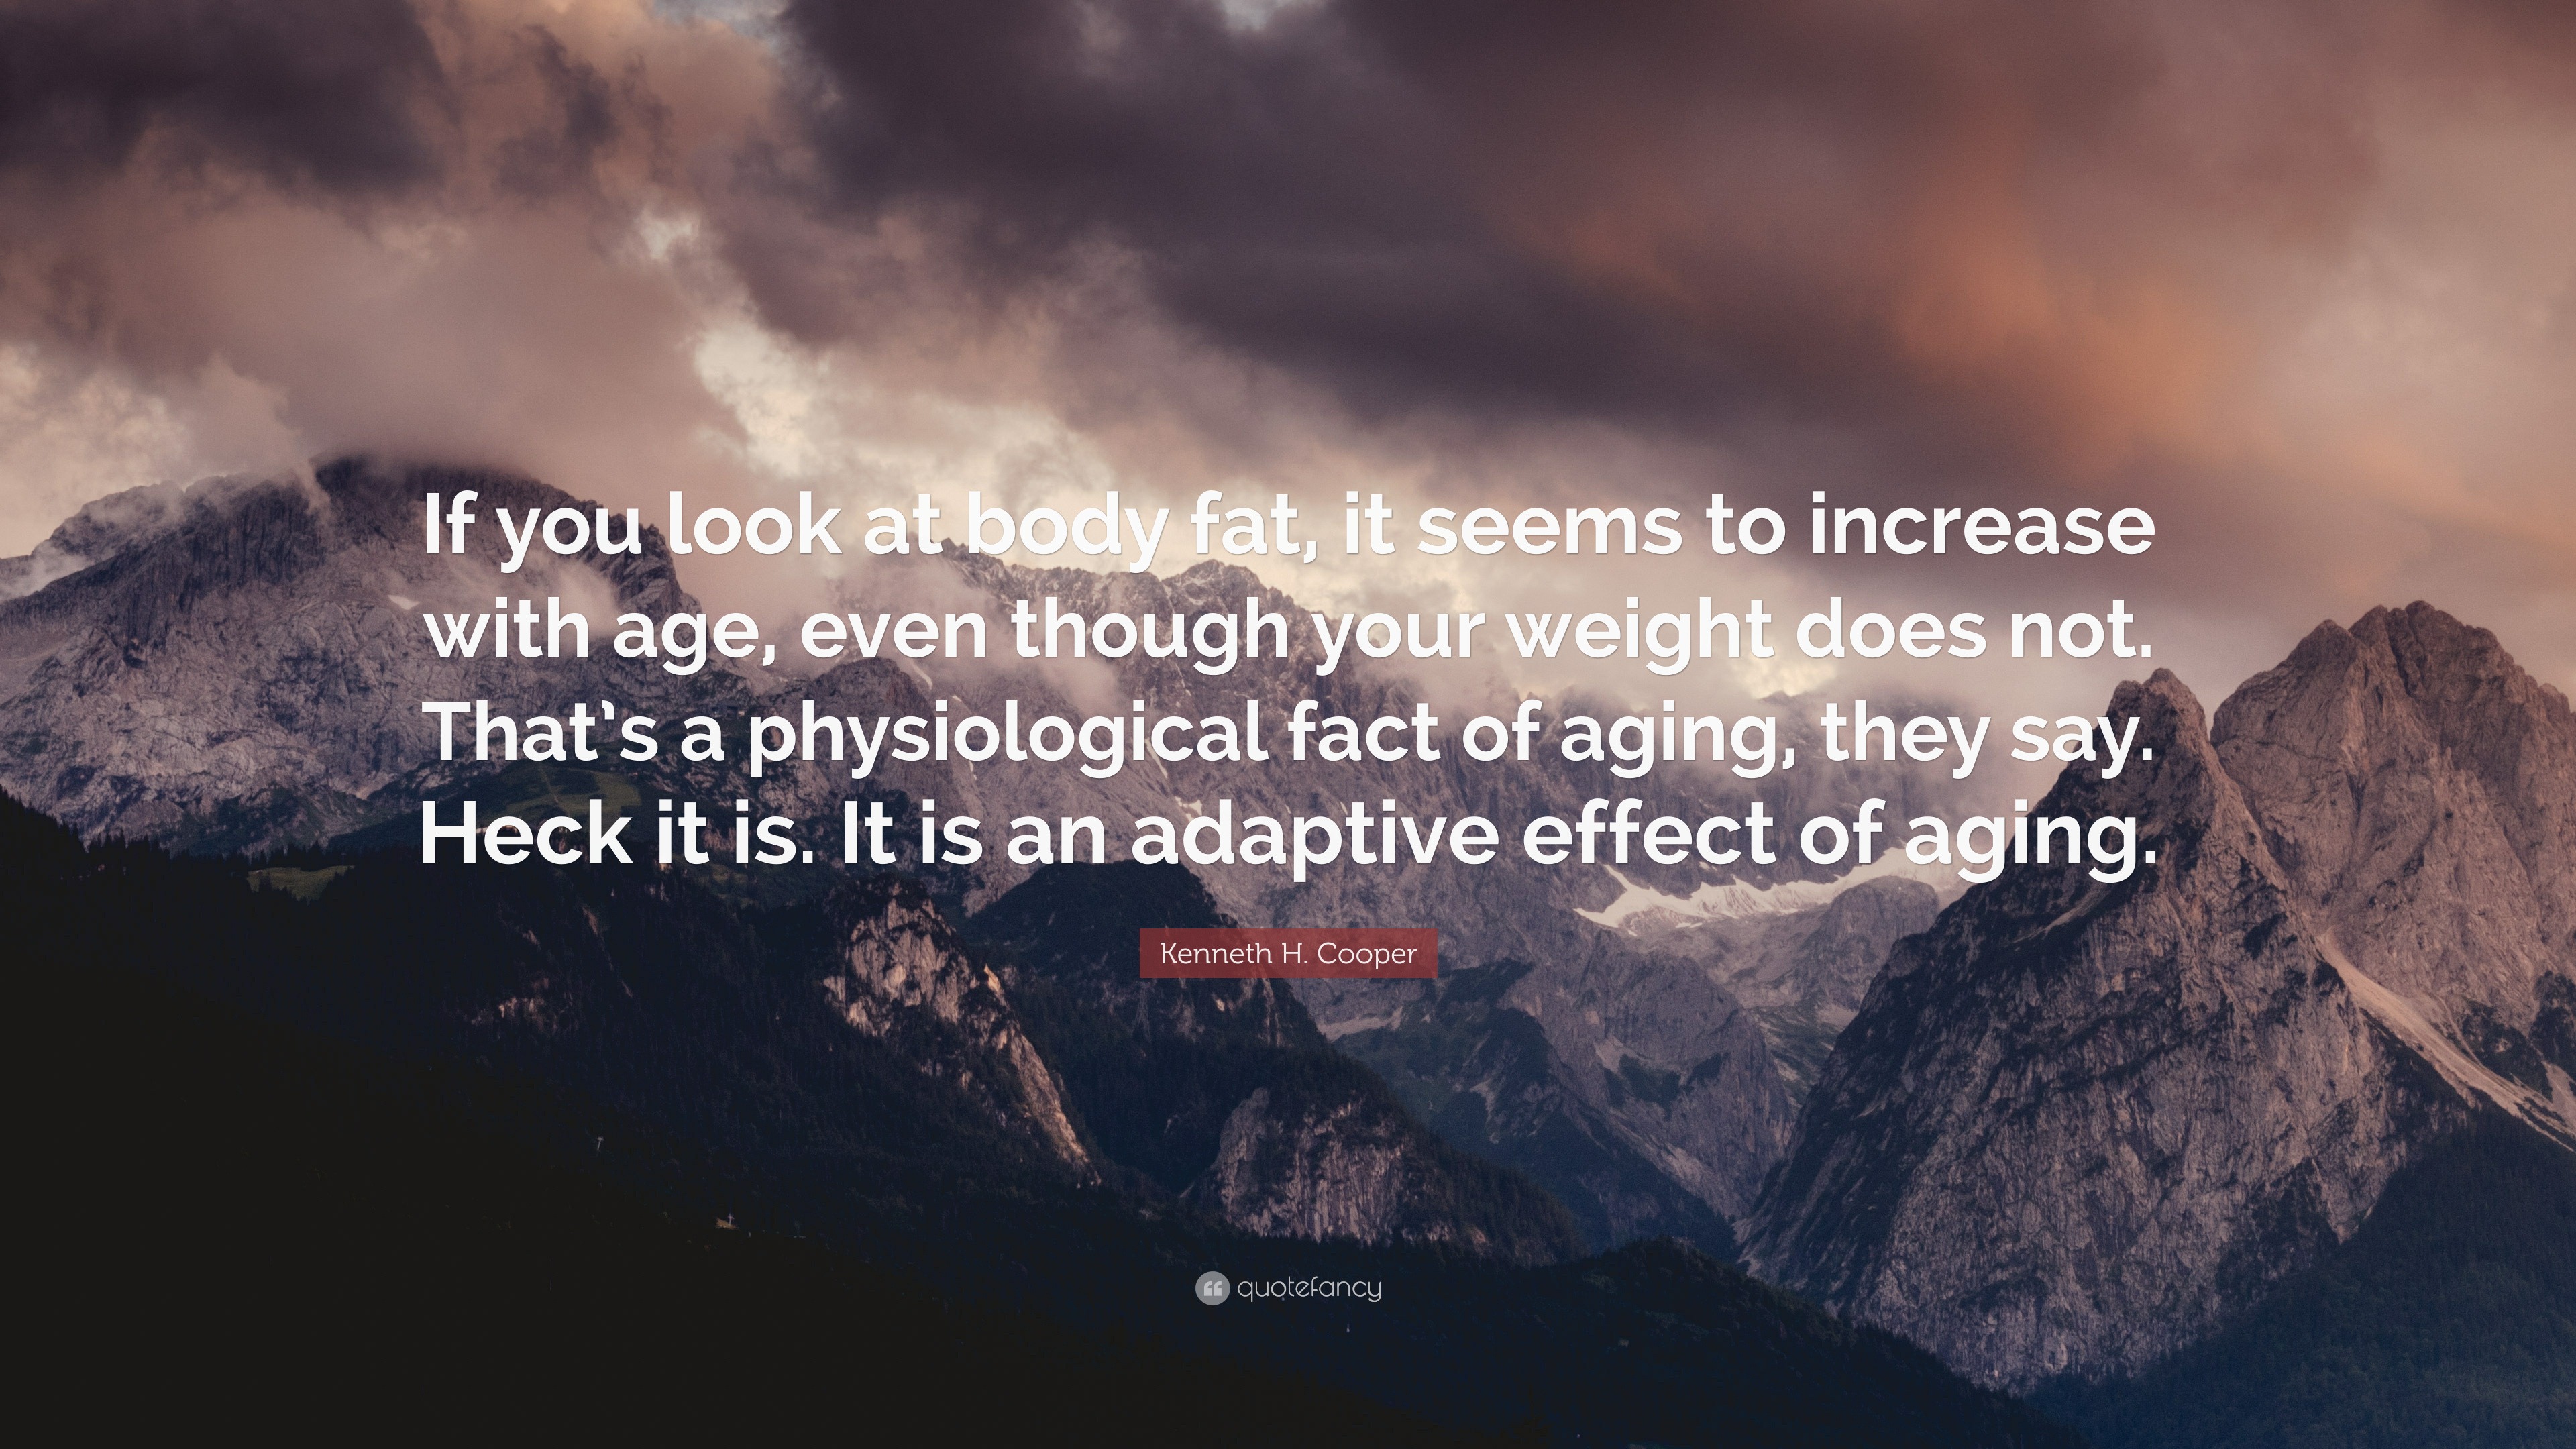 Weight & body fat - the facts